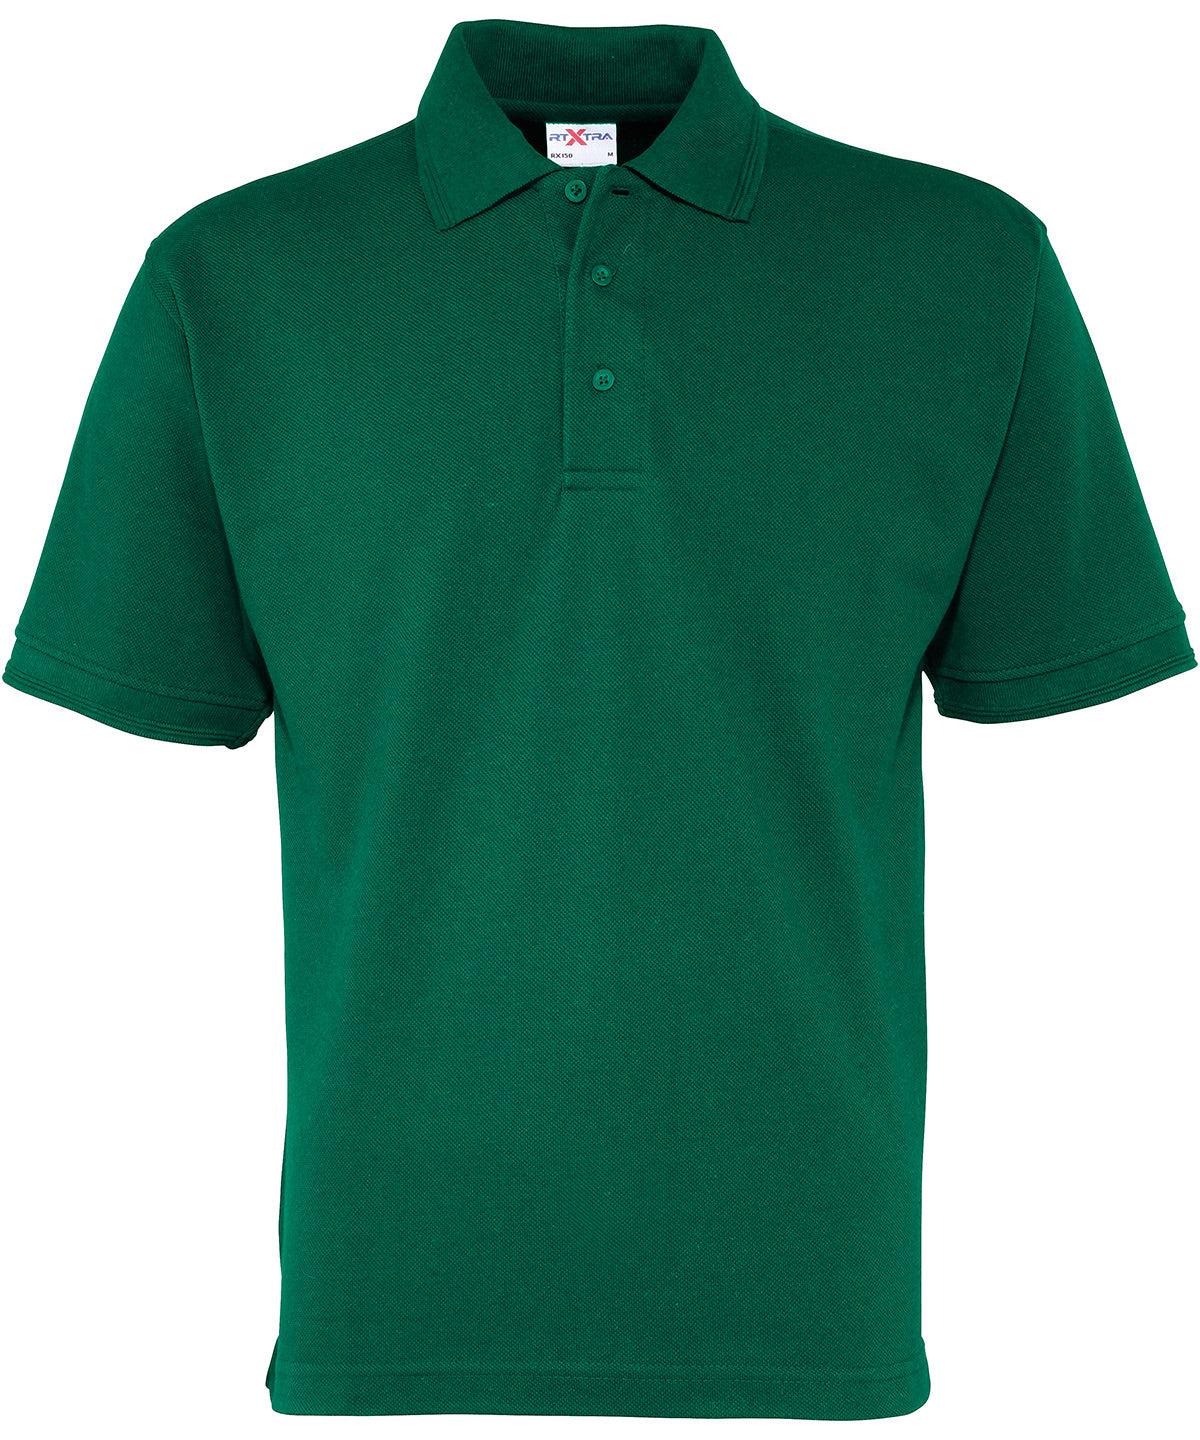 Bottle - Premium polo Polos Last Chance to Buy Activewear & Performance, Plus Sizes, Polos & Casual, Rebrandable, Safe to wash at 60 degrees, Workwear Schoolwear Centres